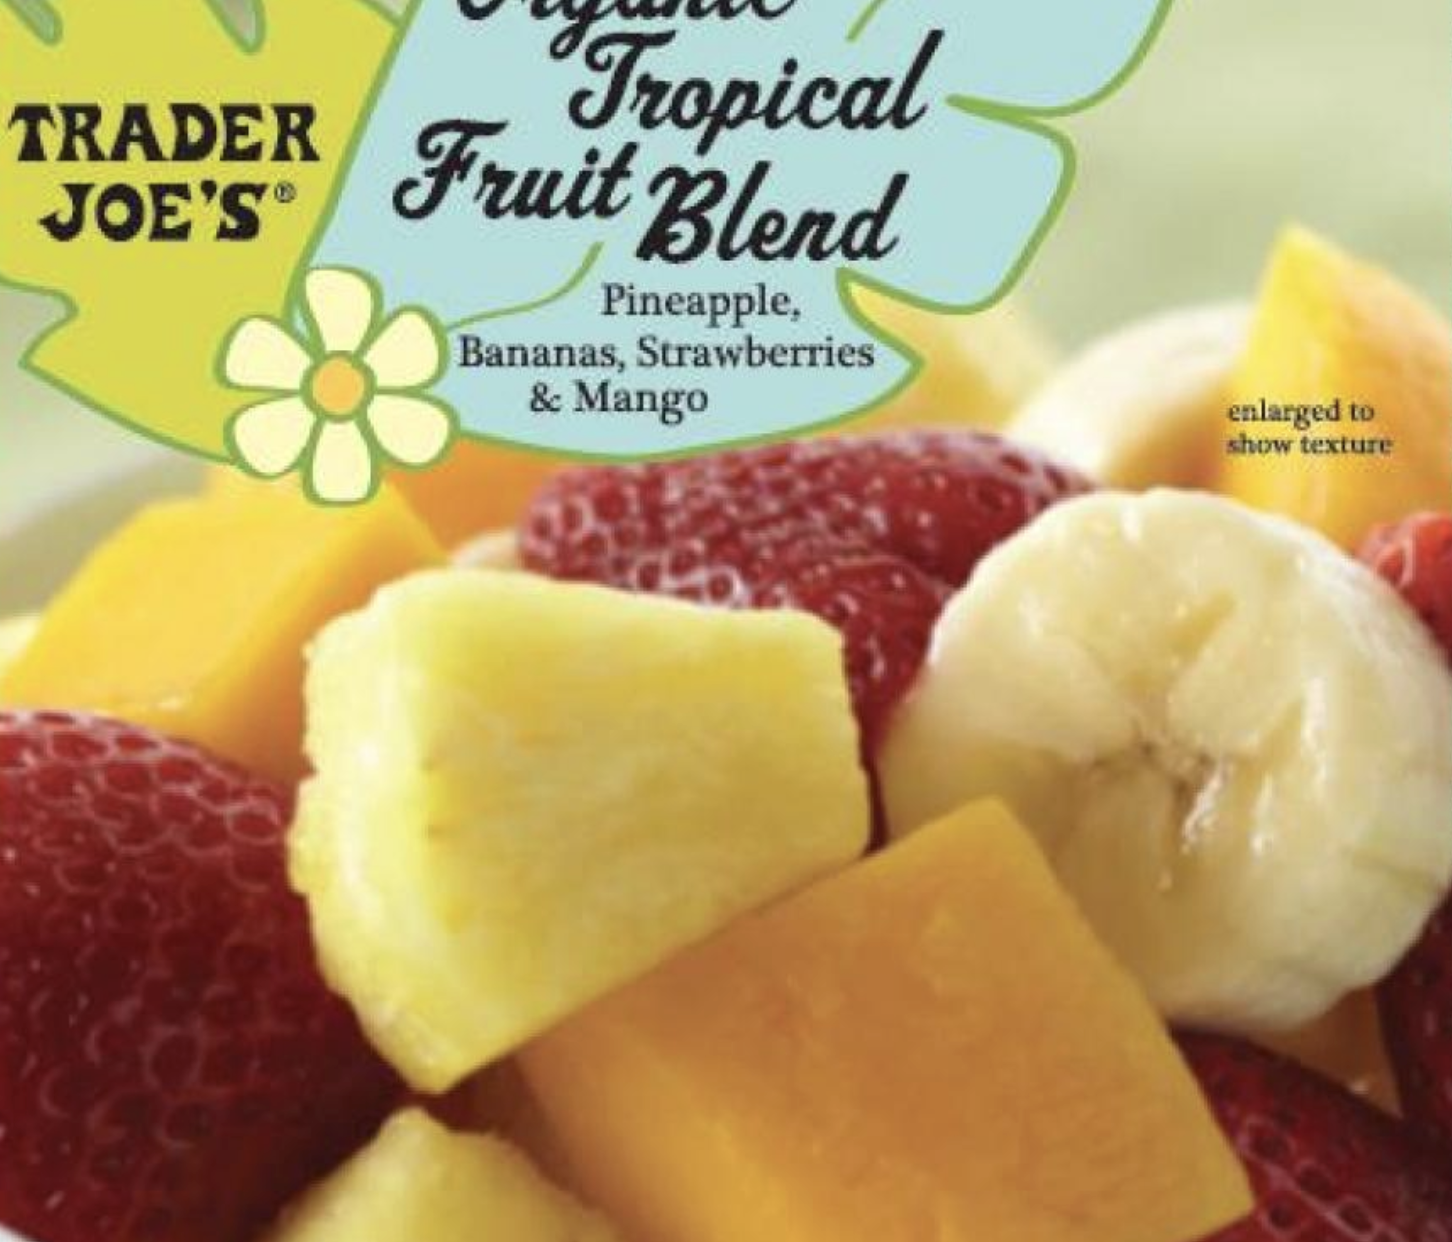 Frozen Fruit Recalled for Listeria at Walmart, Target, Other Stores